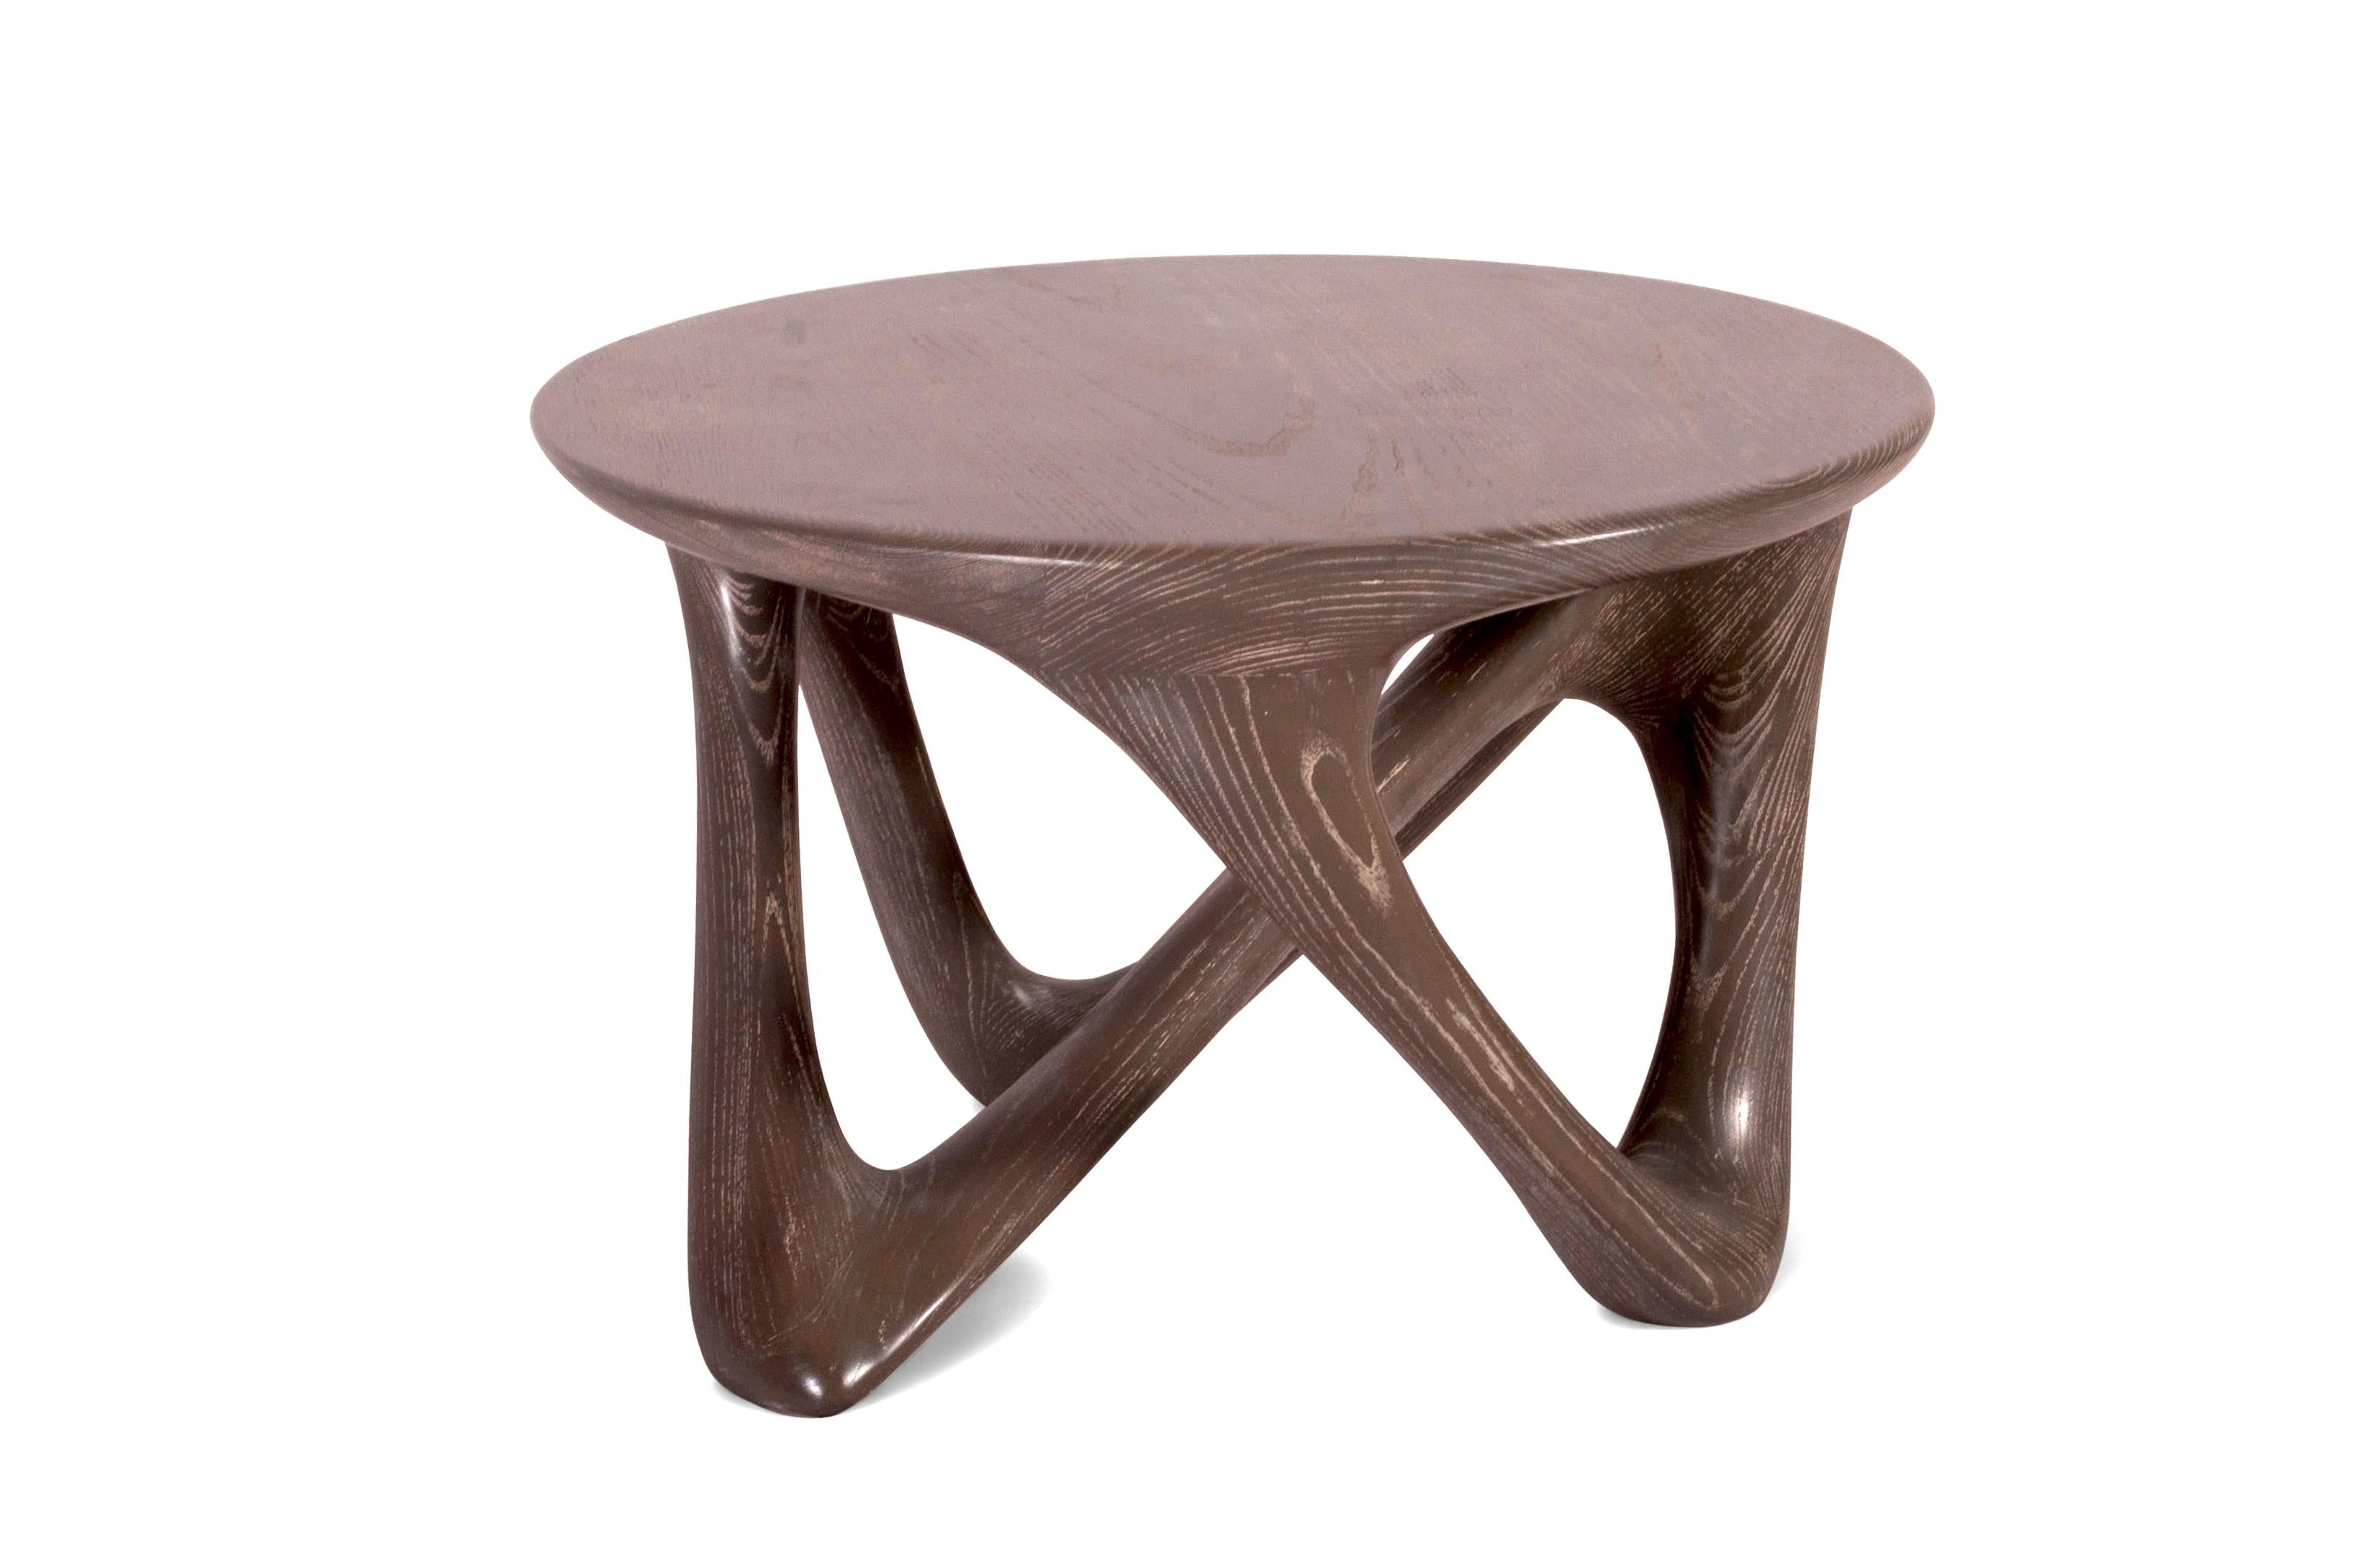 Organic Modern Amorph Ya Modern Side Table in Mesa Stain on Solid Wood For Sale